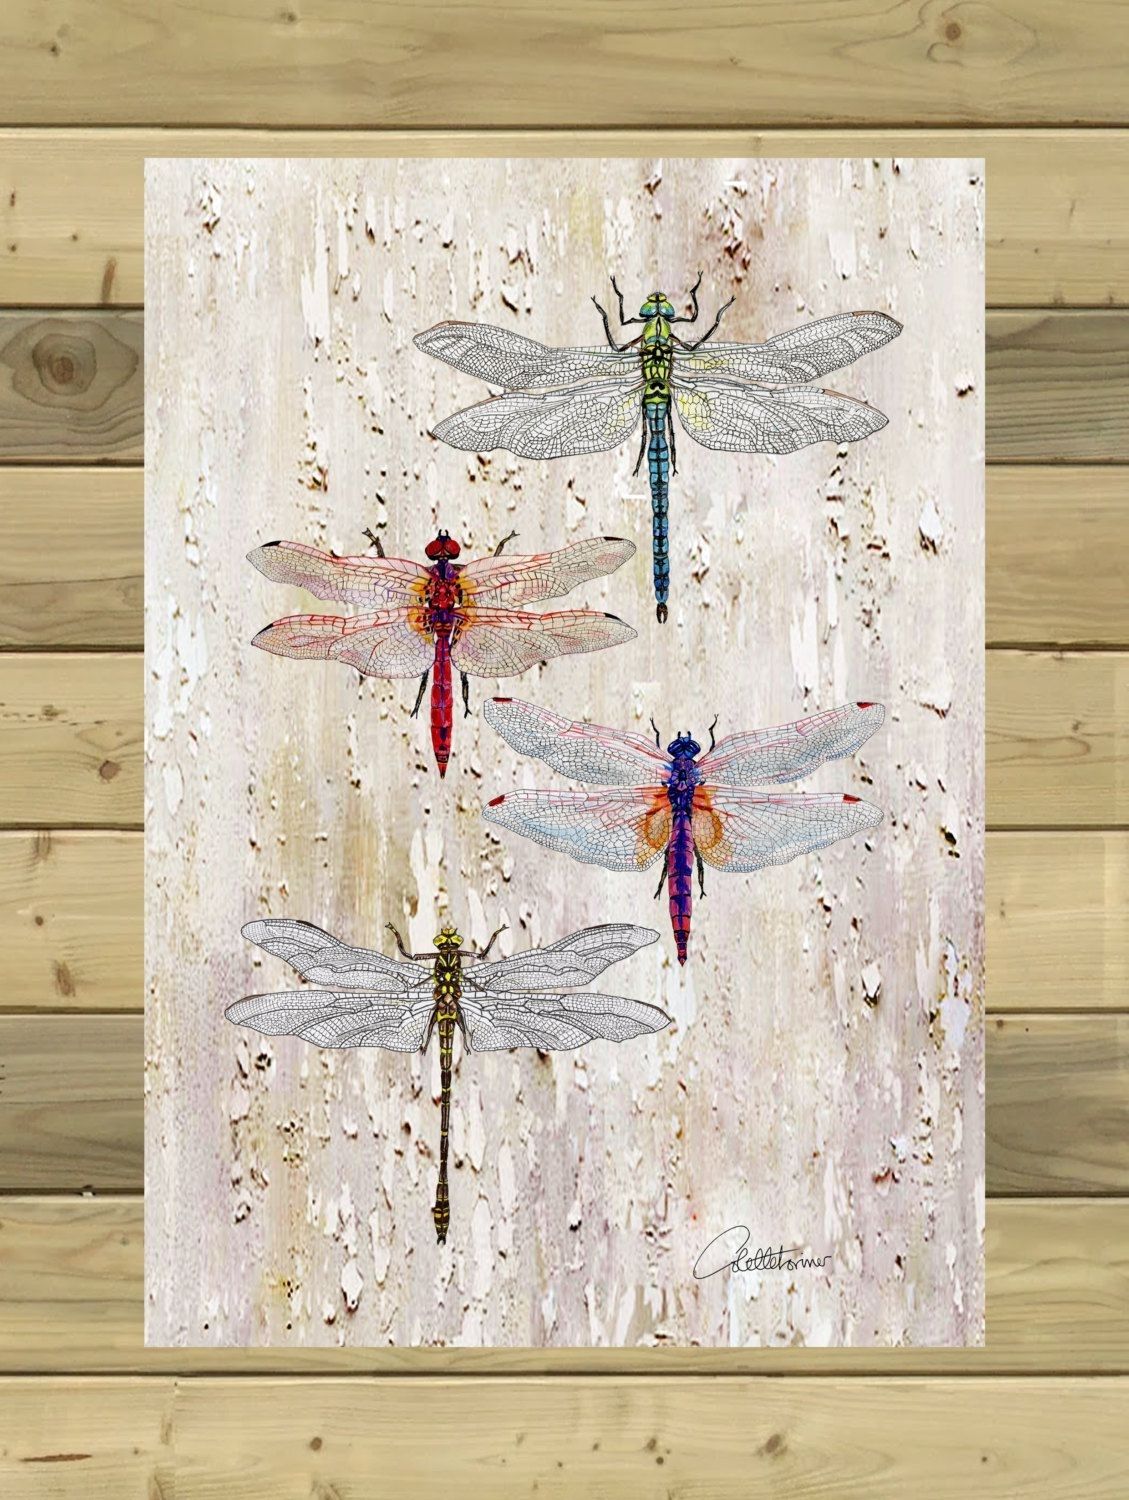 Dragonflies Print Dragonfly Illustration Dragonfly Design Wall Art Throughout Dragonfly Painting Wall Art (View 19 of 20)